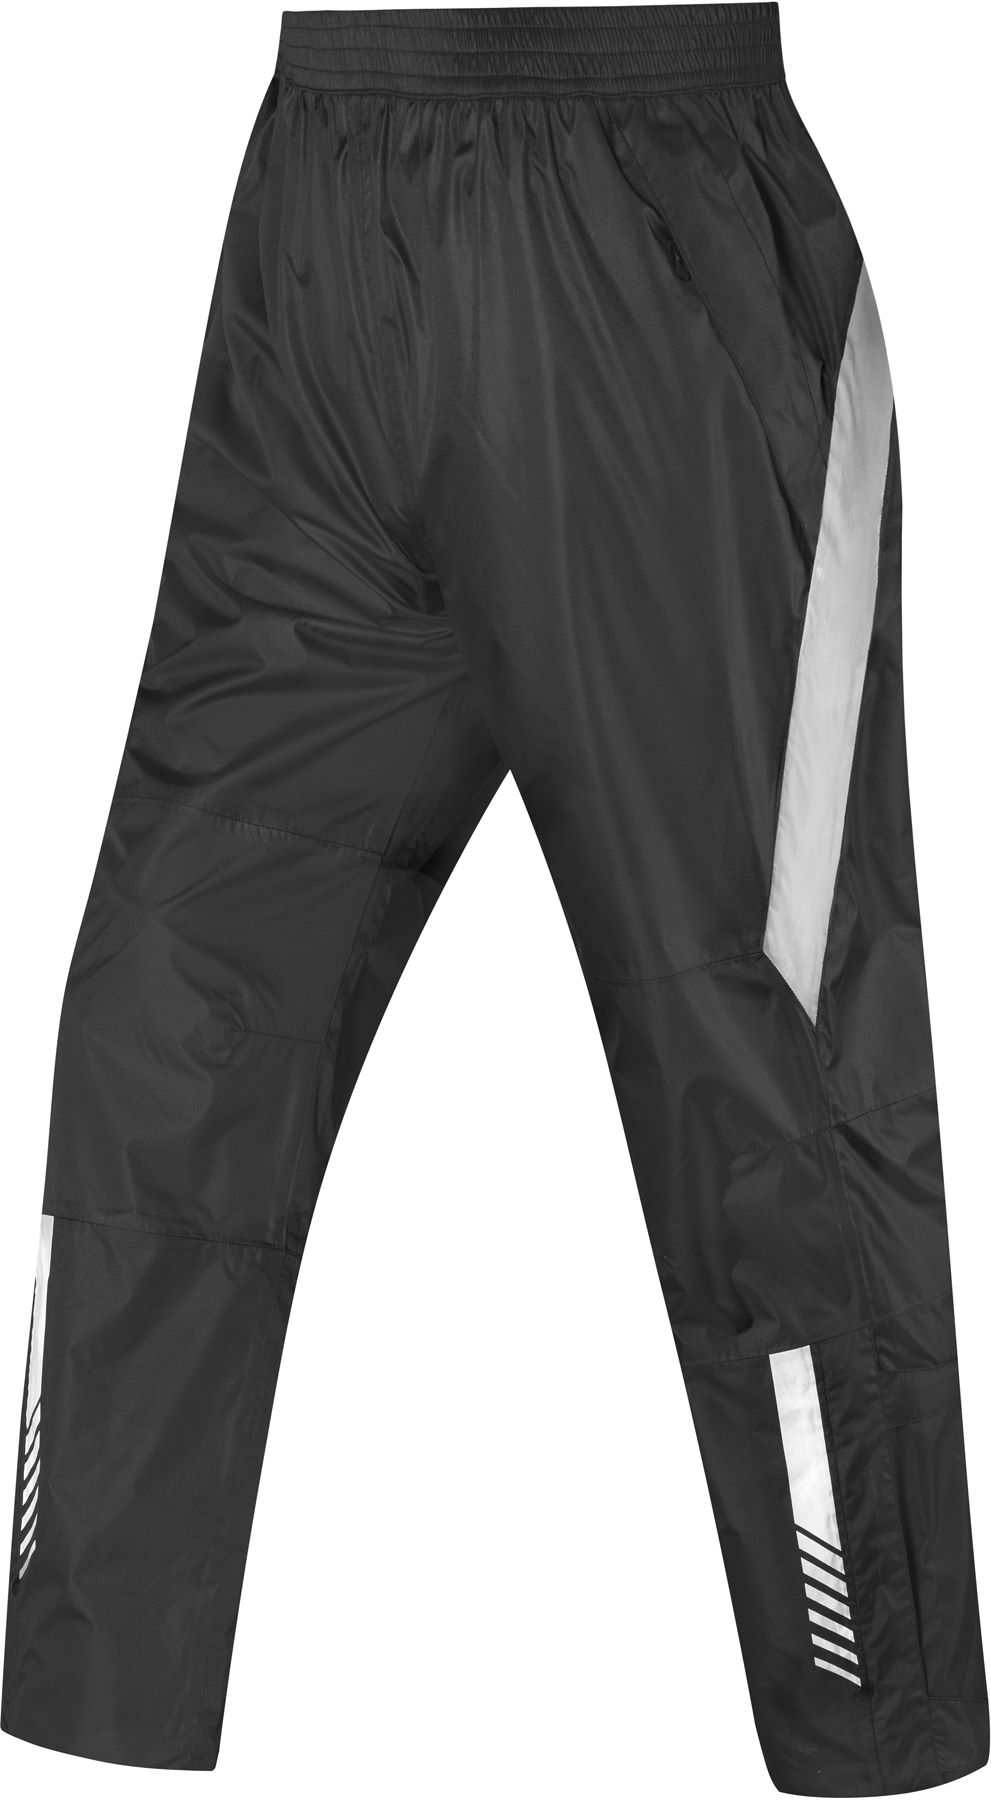 Altura Nightvision 3 Waterproof Over Trousers